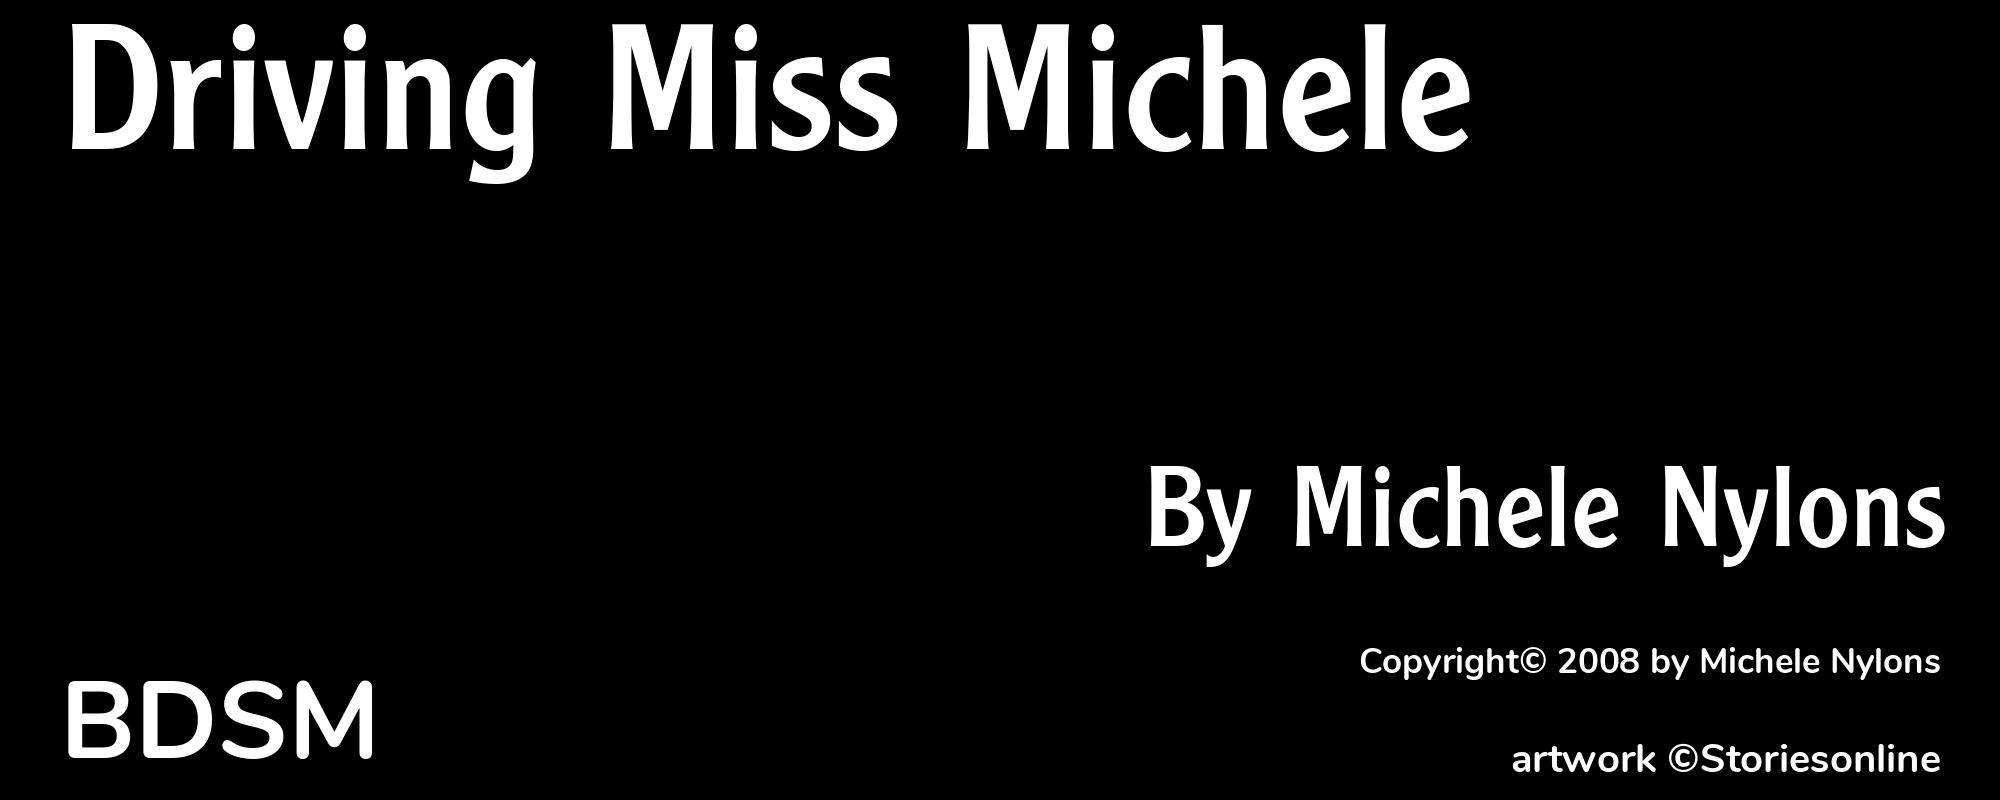 Driving Miss Michele - Cover